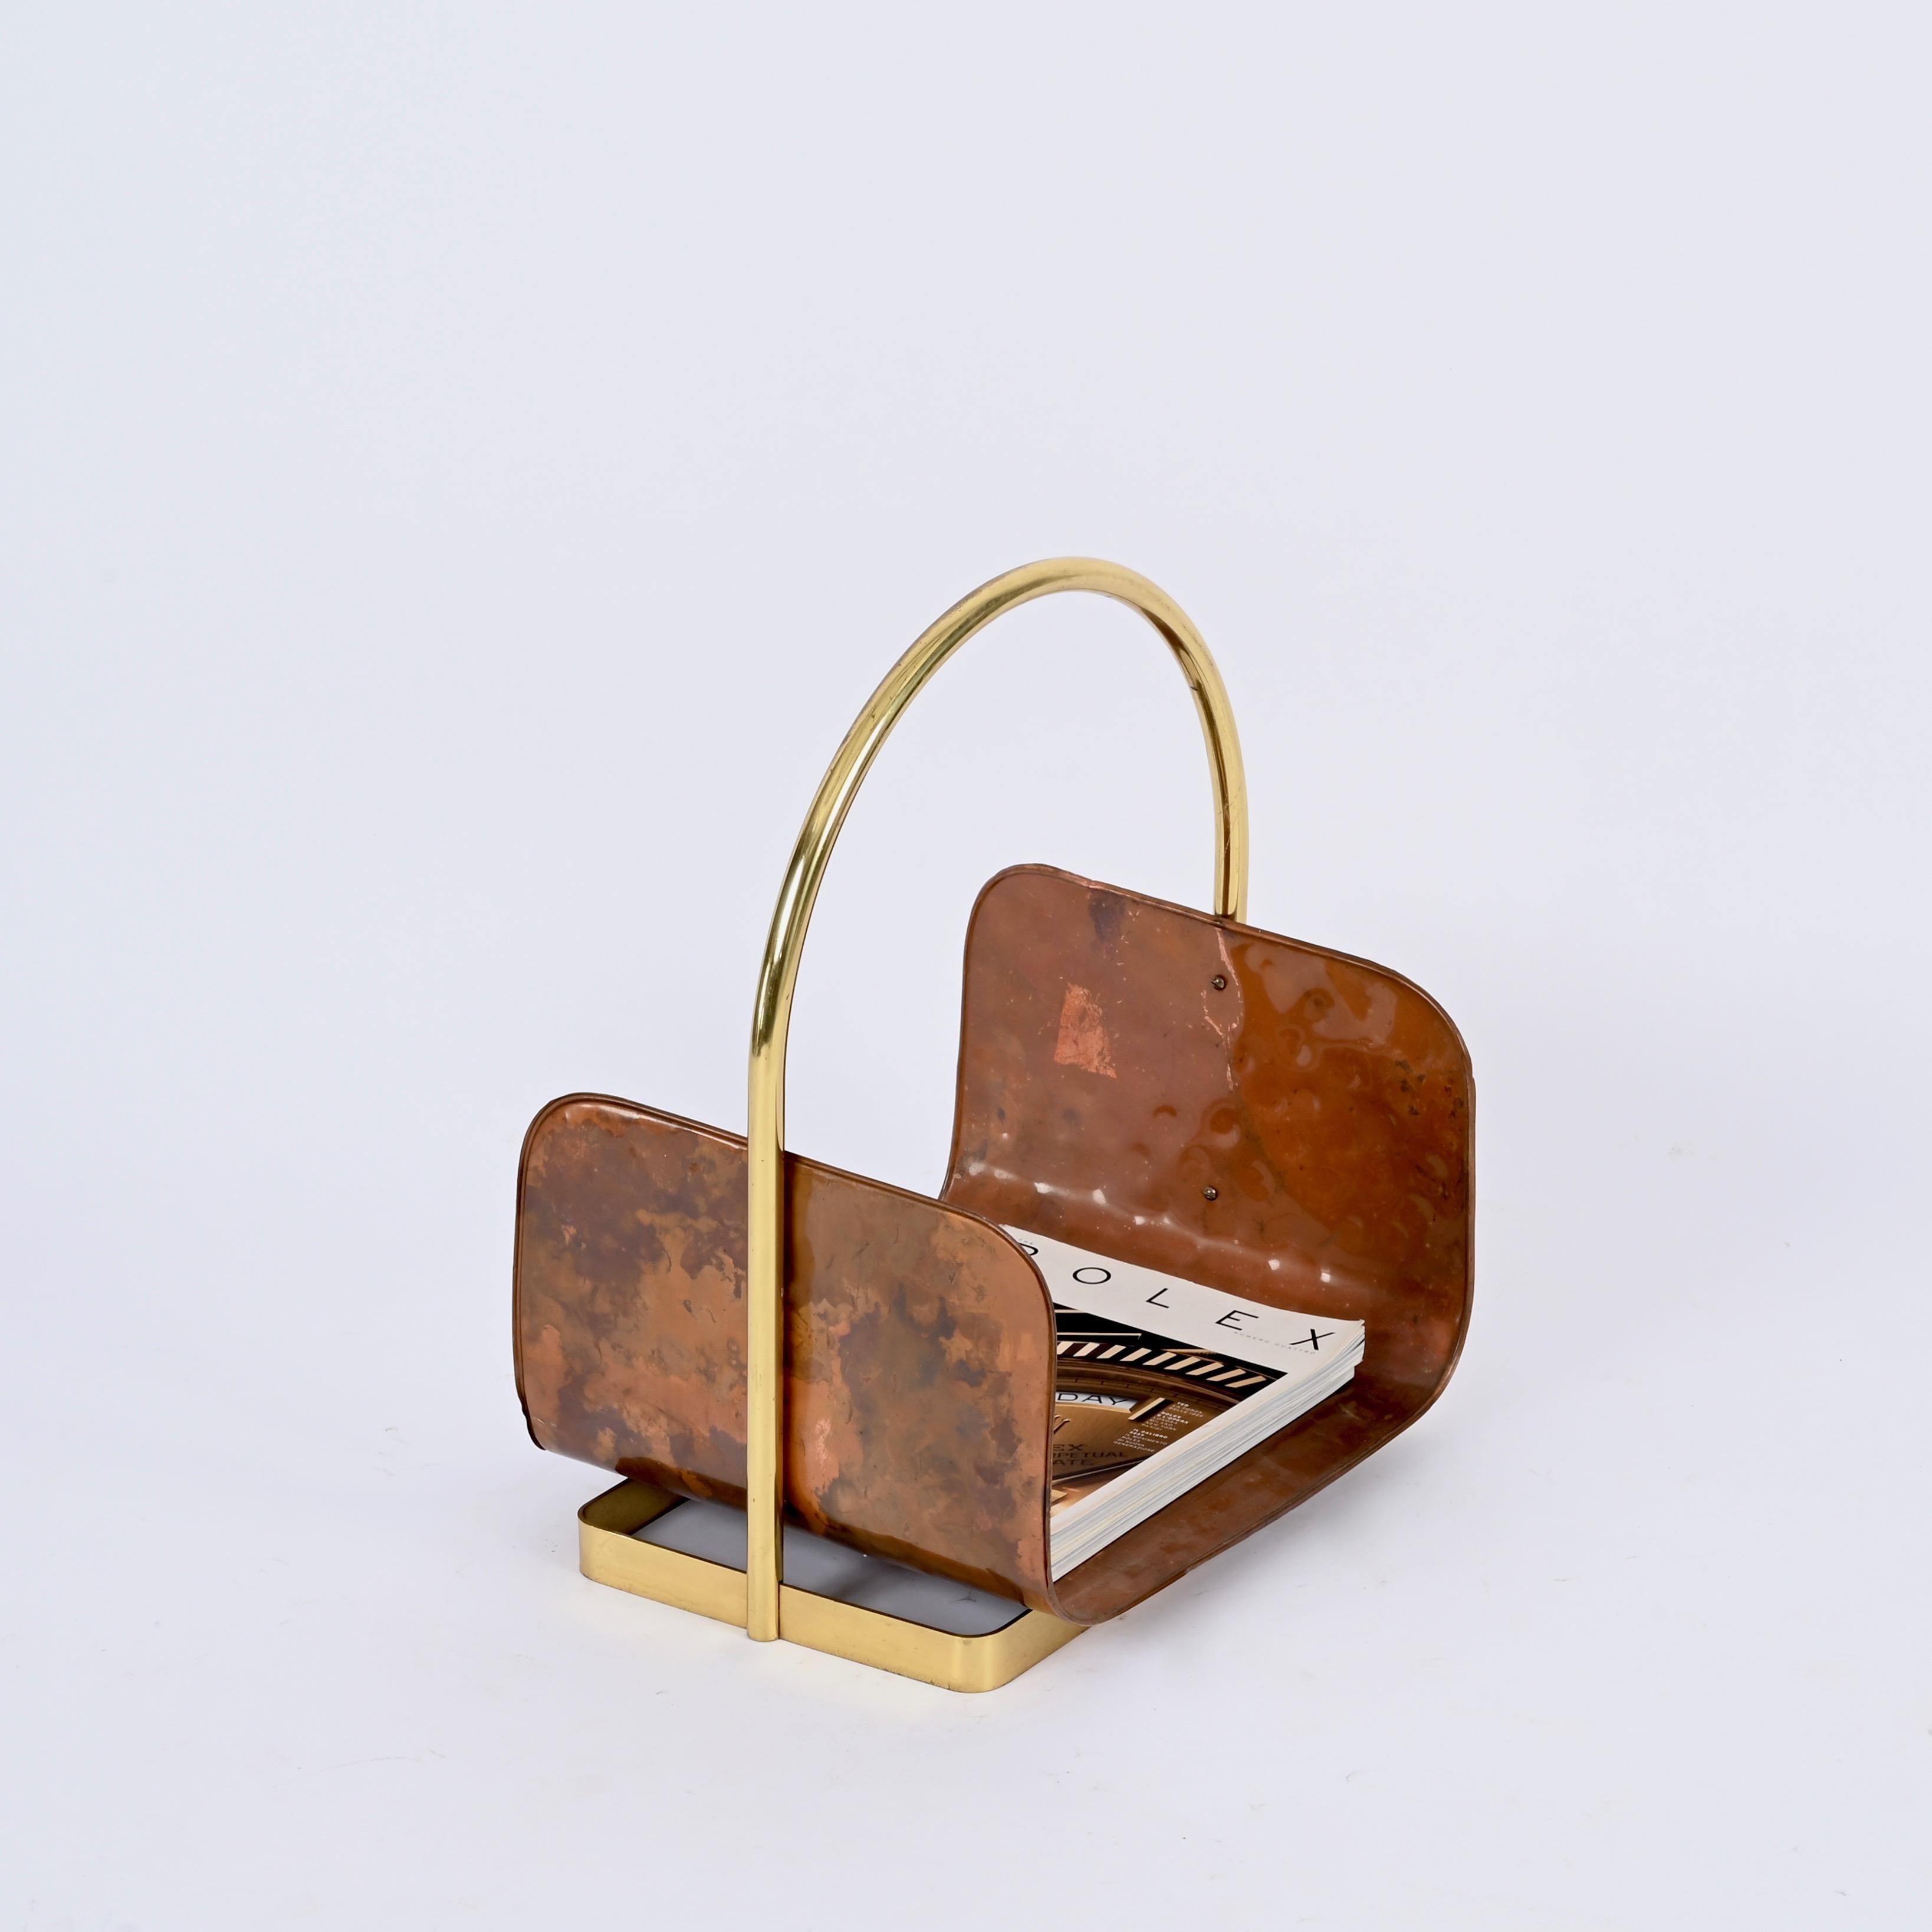 Midcentury Italian Magazine Rack in Hammered Copper and Brass, Italy 1970s For Sale 2